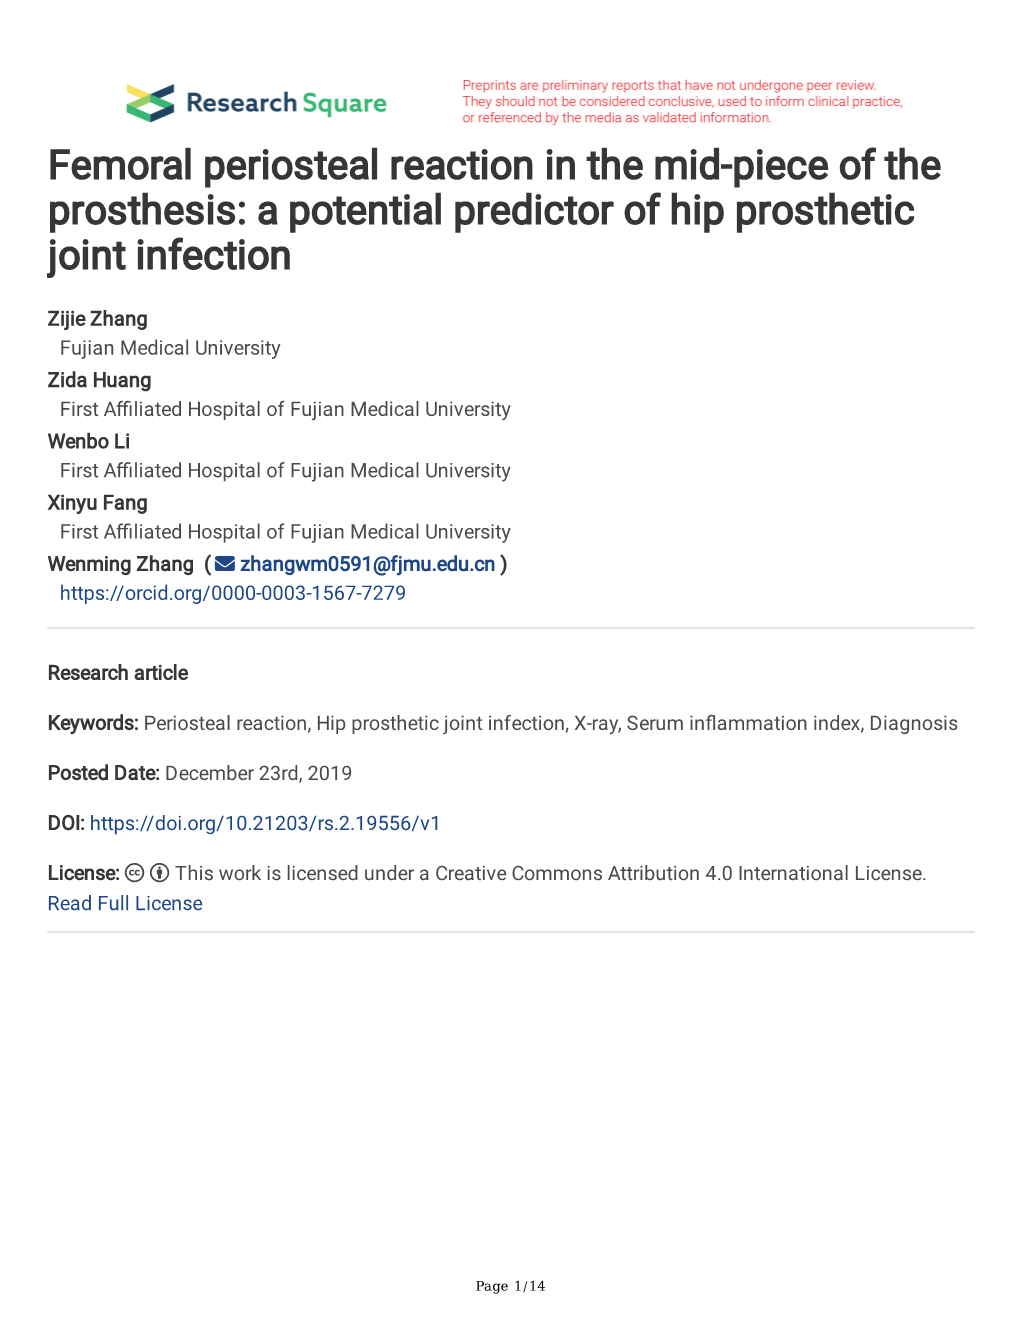 Femoral Periosteal Reaction in the Mid-Piece of the Prosthesis: a Potential Predictor of Hip Prosthetic Joint Infection